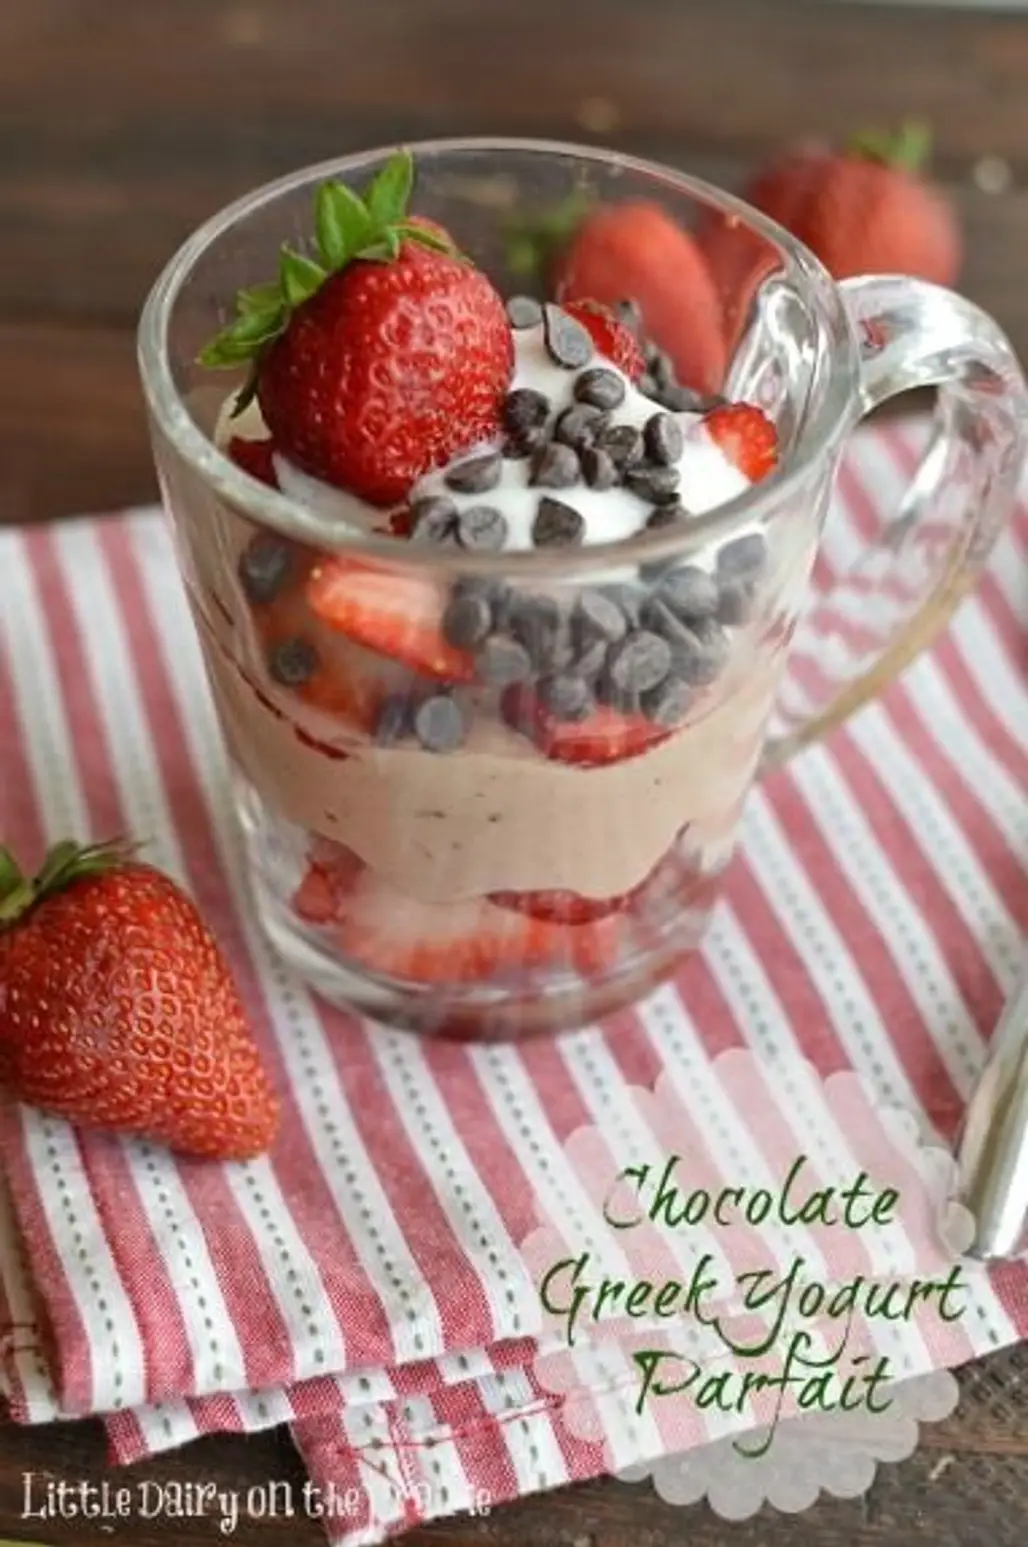 Chocolate Chips and Strawberries